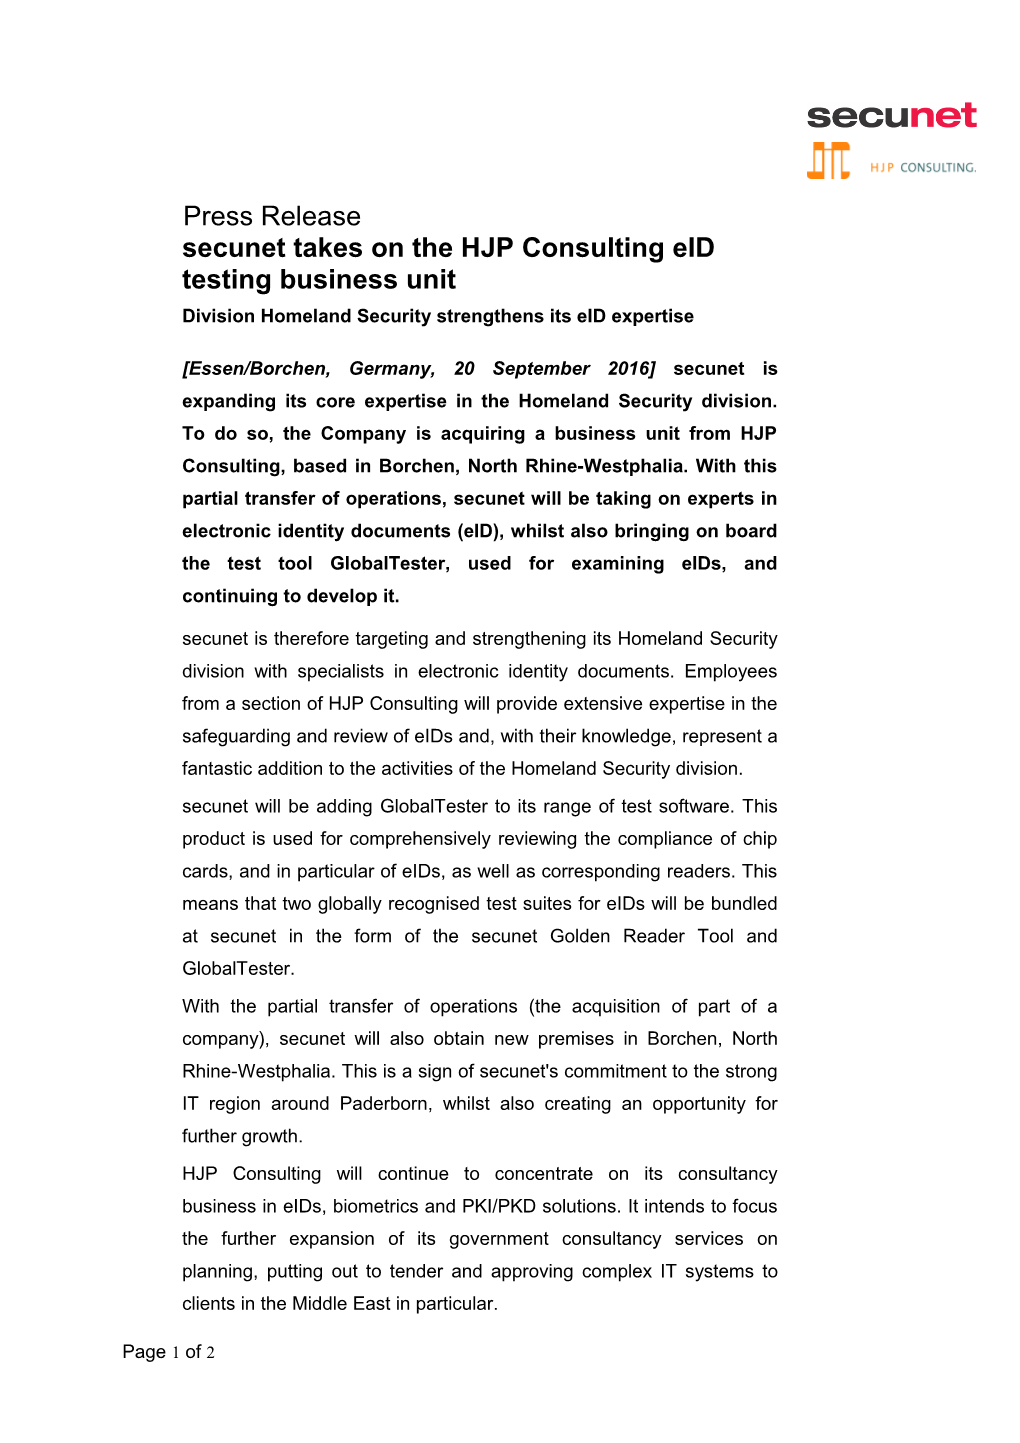 Secunet Takes on the HJP Consulting Eid Testing Business Unit